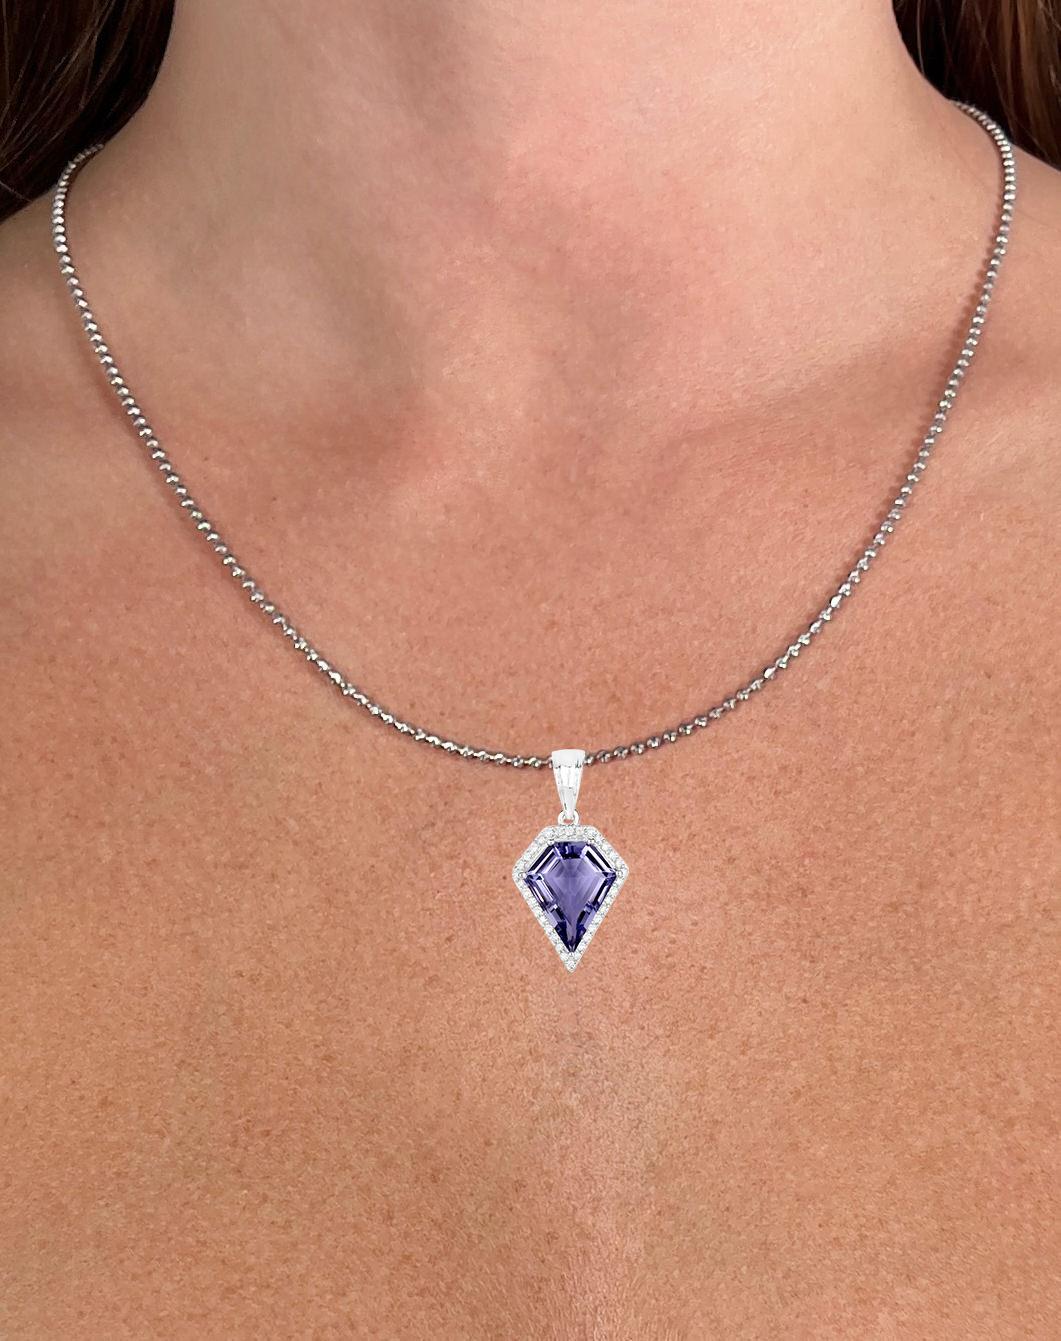 Contemporary Iolite Pendant Necklace With Diamonds 4.65 Carats 14K White Gold For Sale